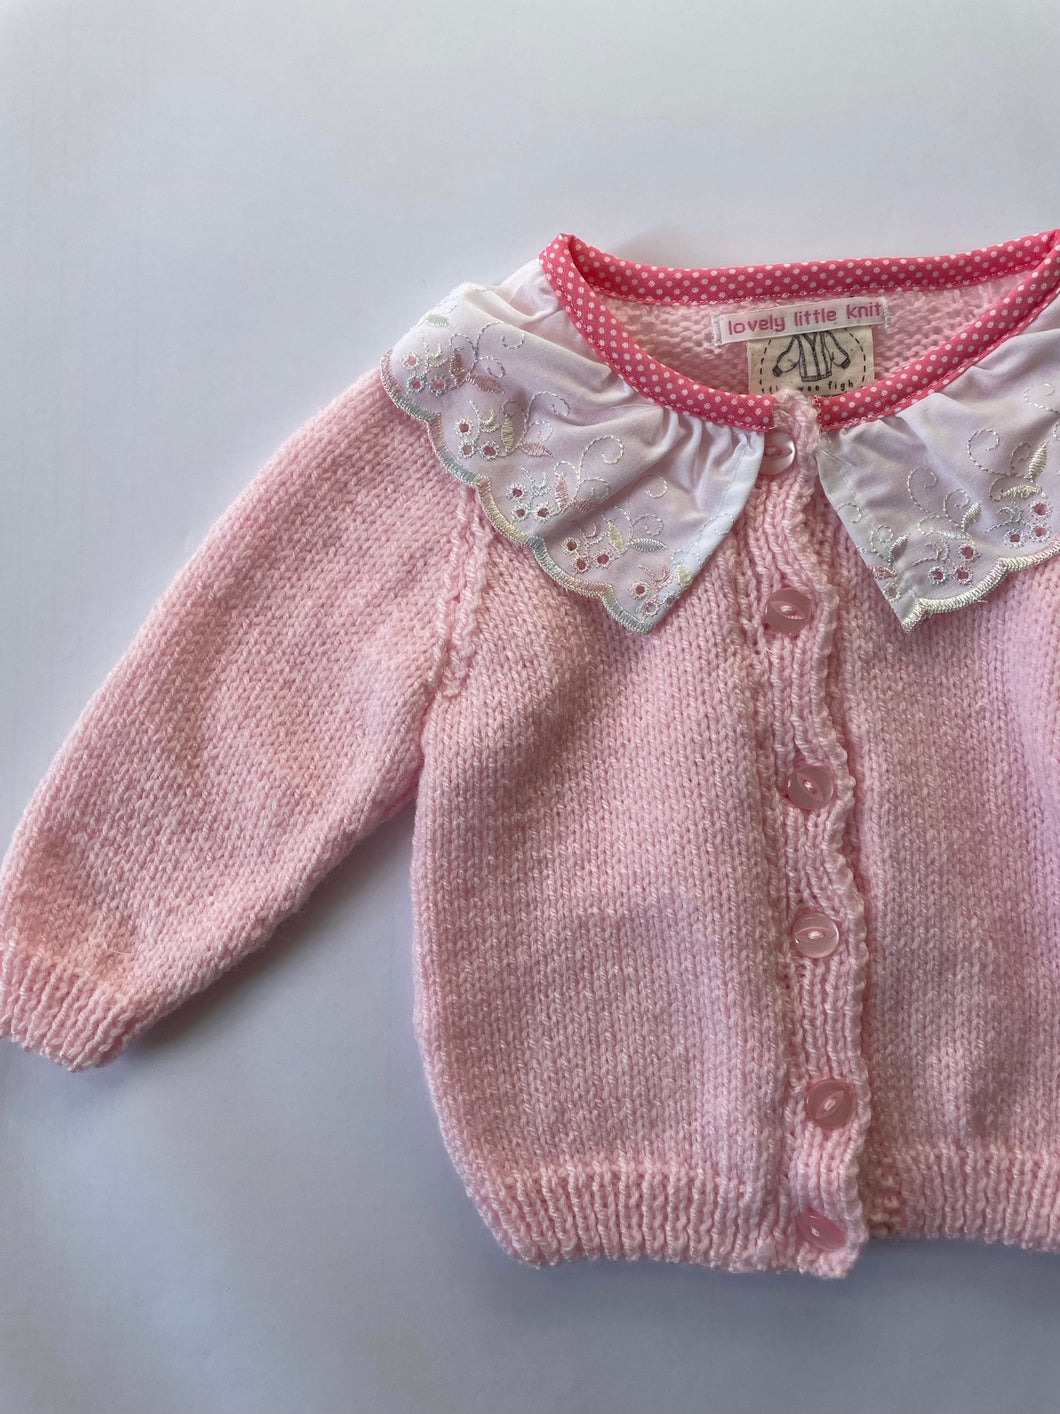 0-6 months - Pink frilly cardigan